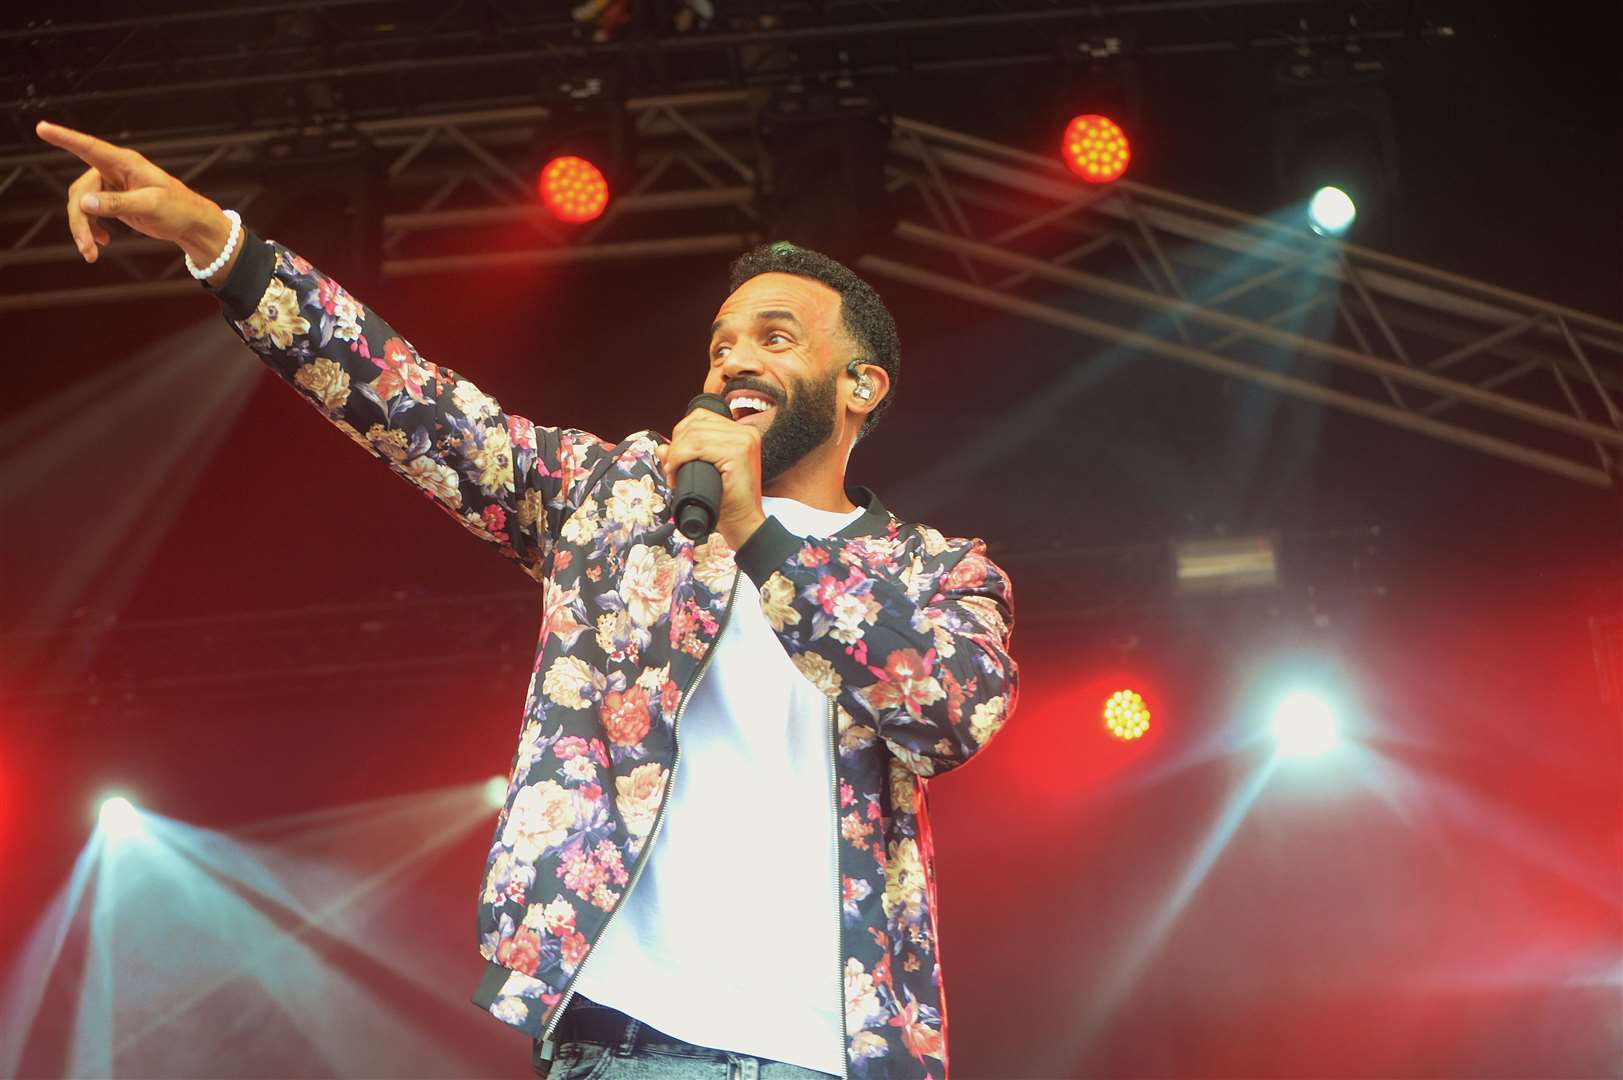 Craig David will be performing his TS5 tour in Margate this August